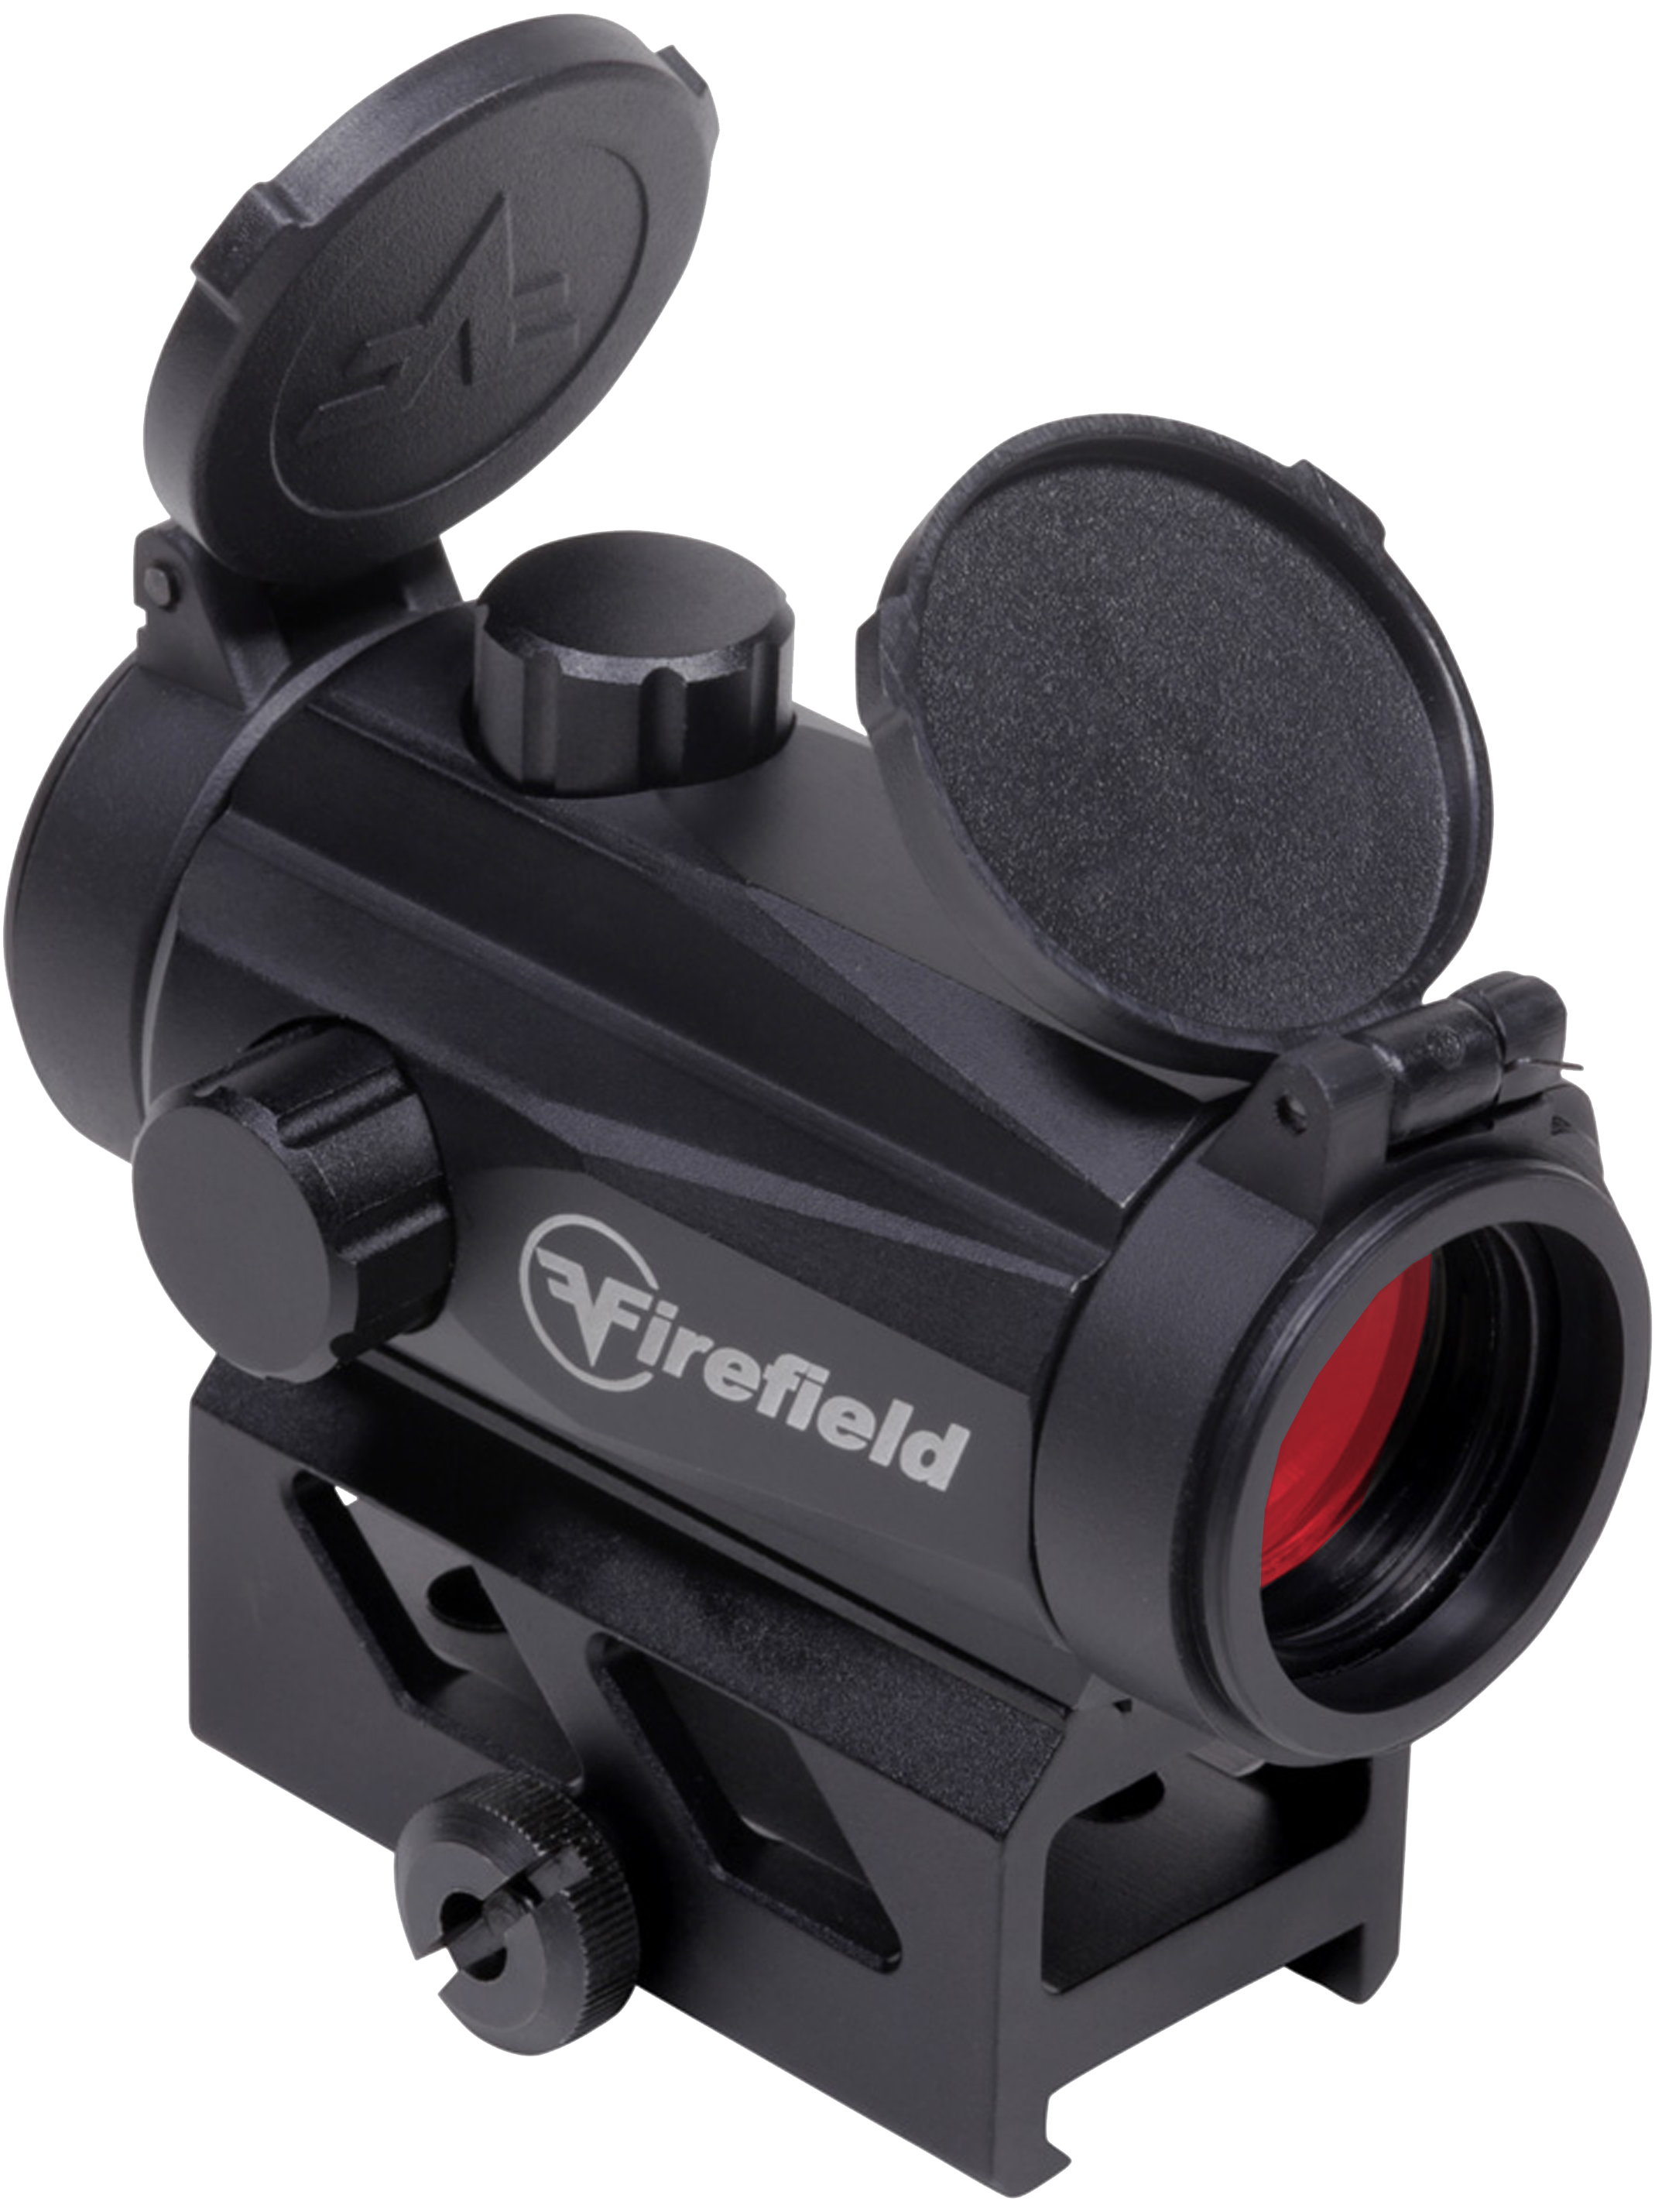 Firefield Impulse 1x22 Dot Sight with Red Laser